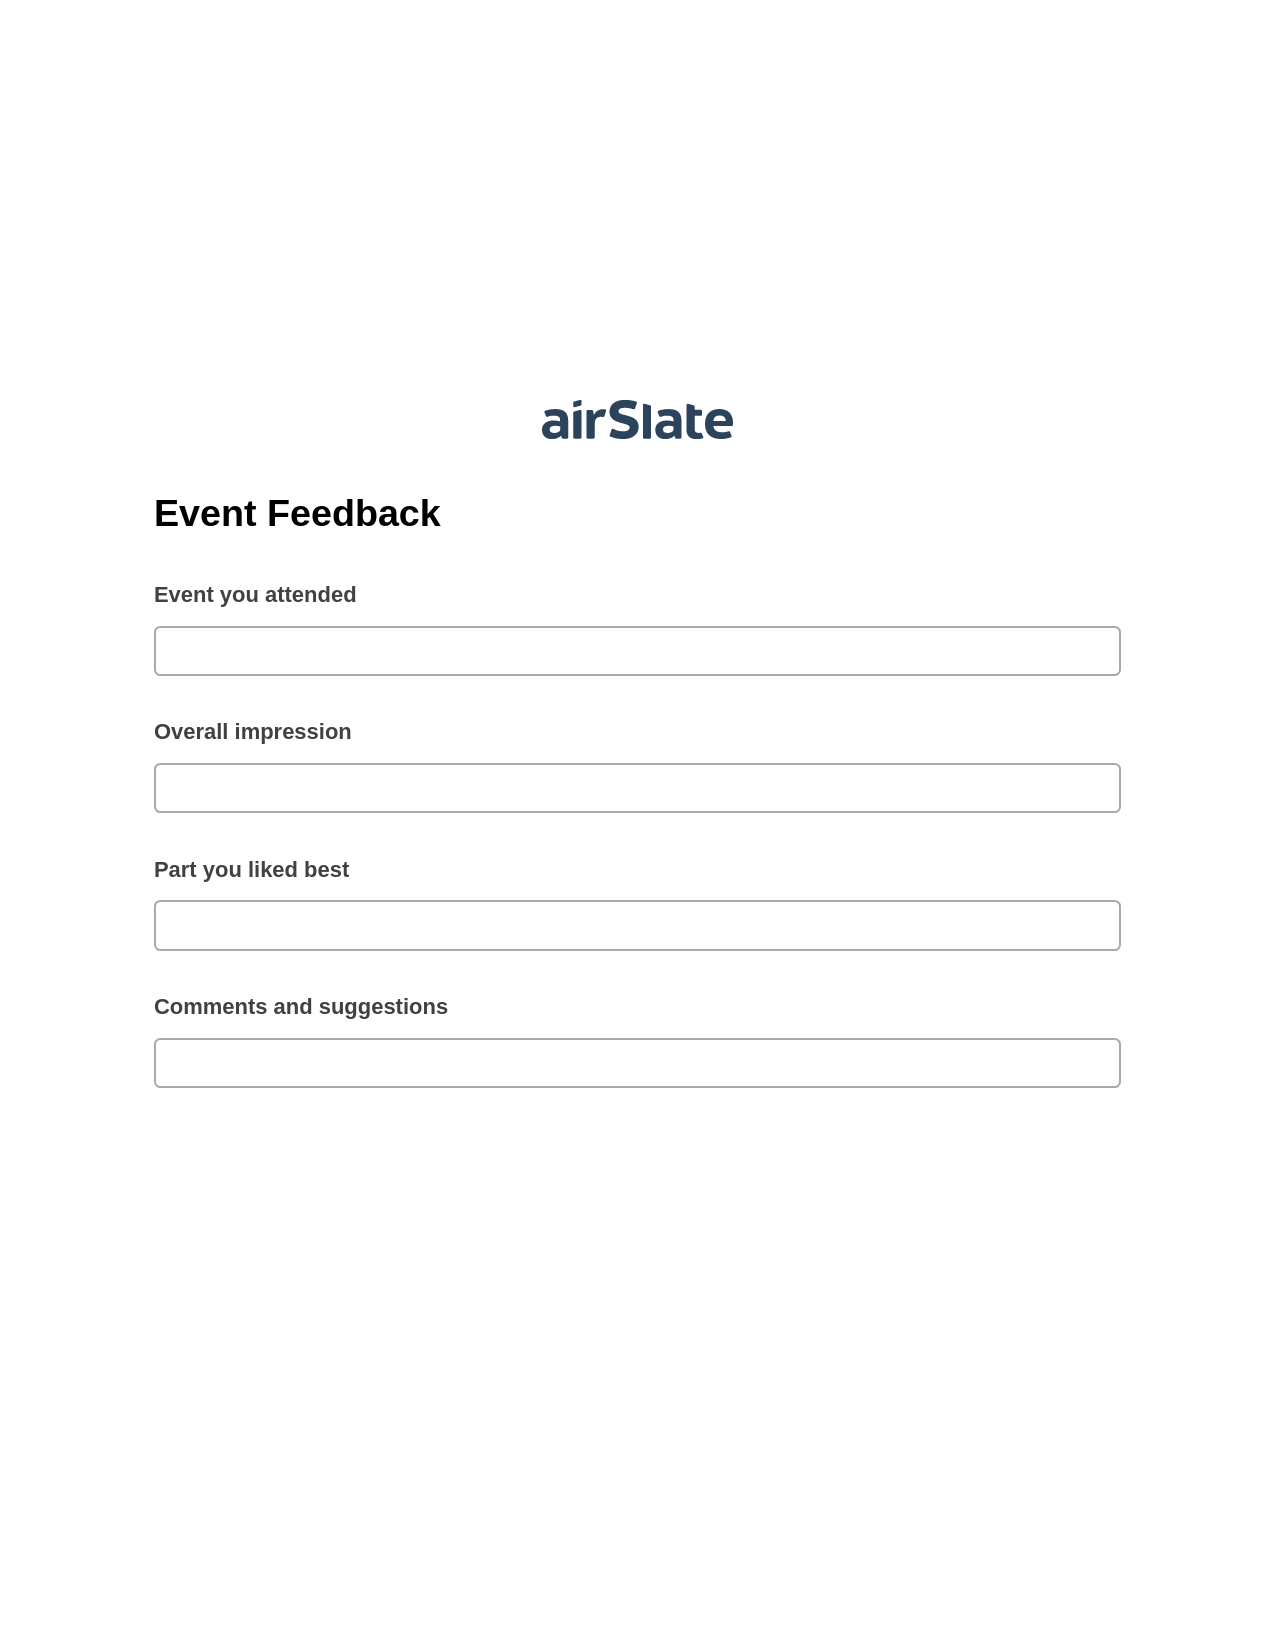 Event Feedback Pre-fill from Salesforce Record Bot, Audit Trail Bot, Box Bot